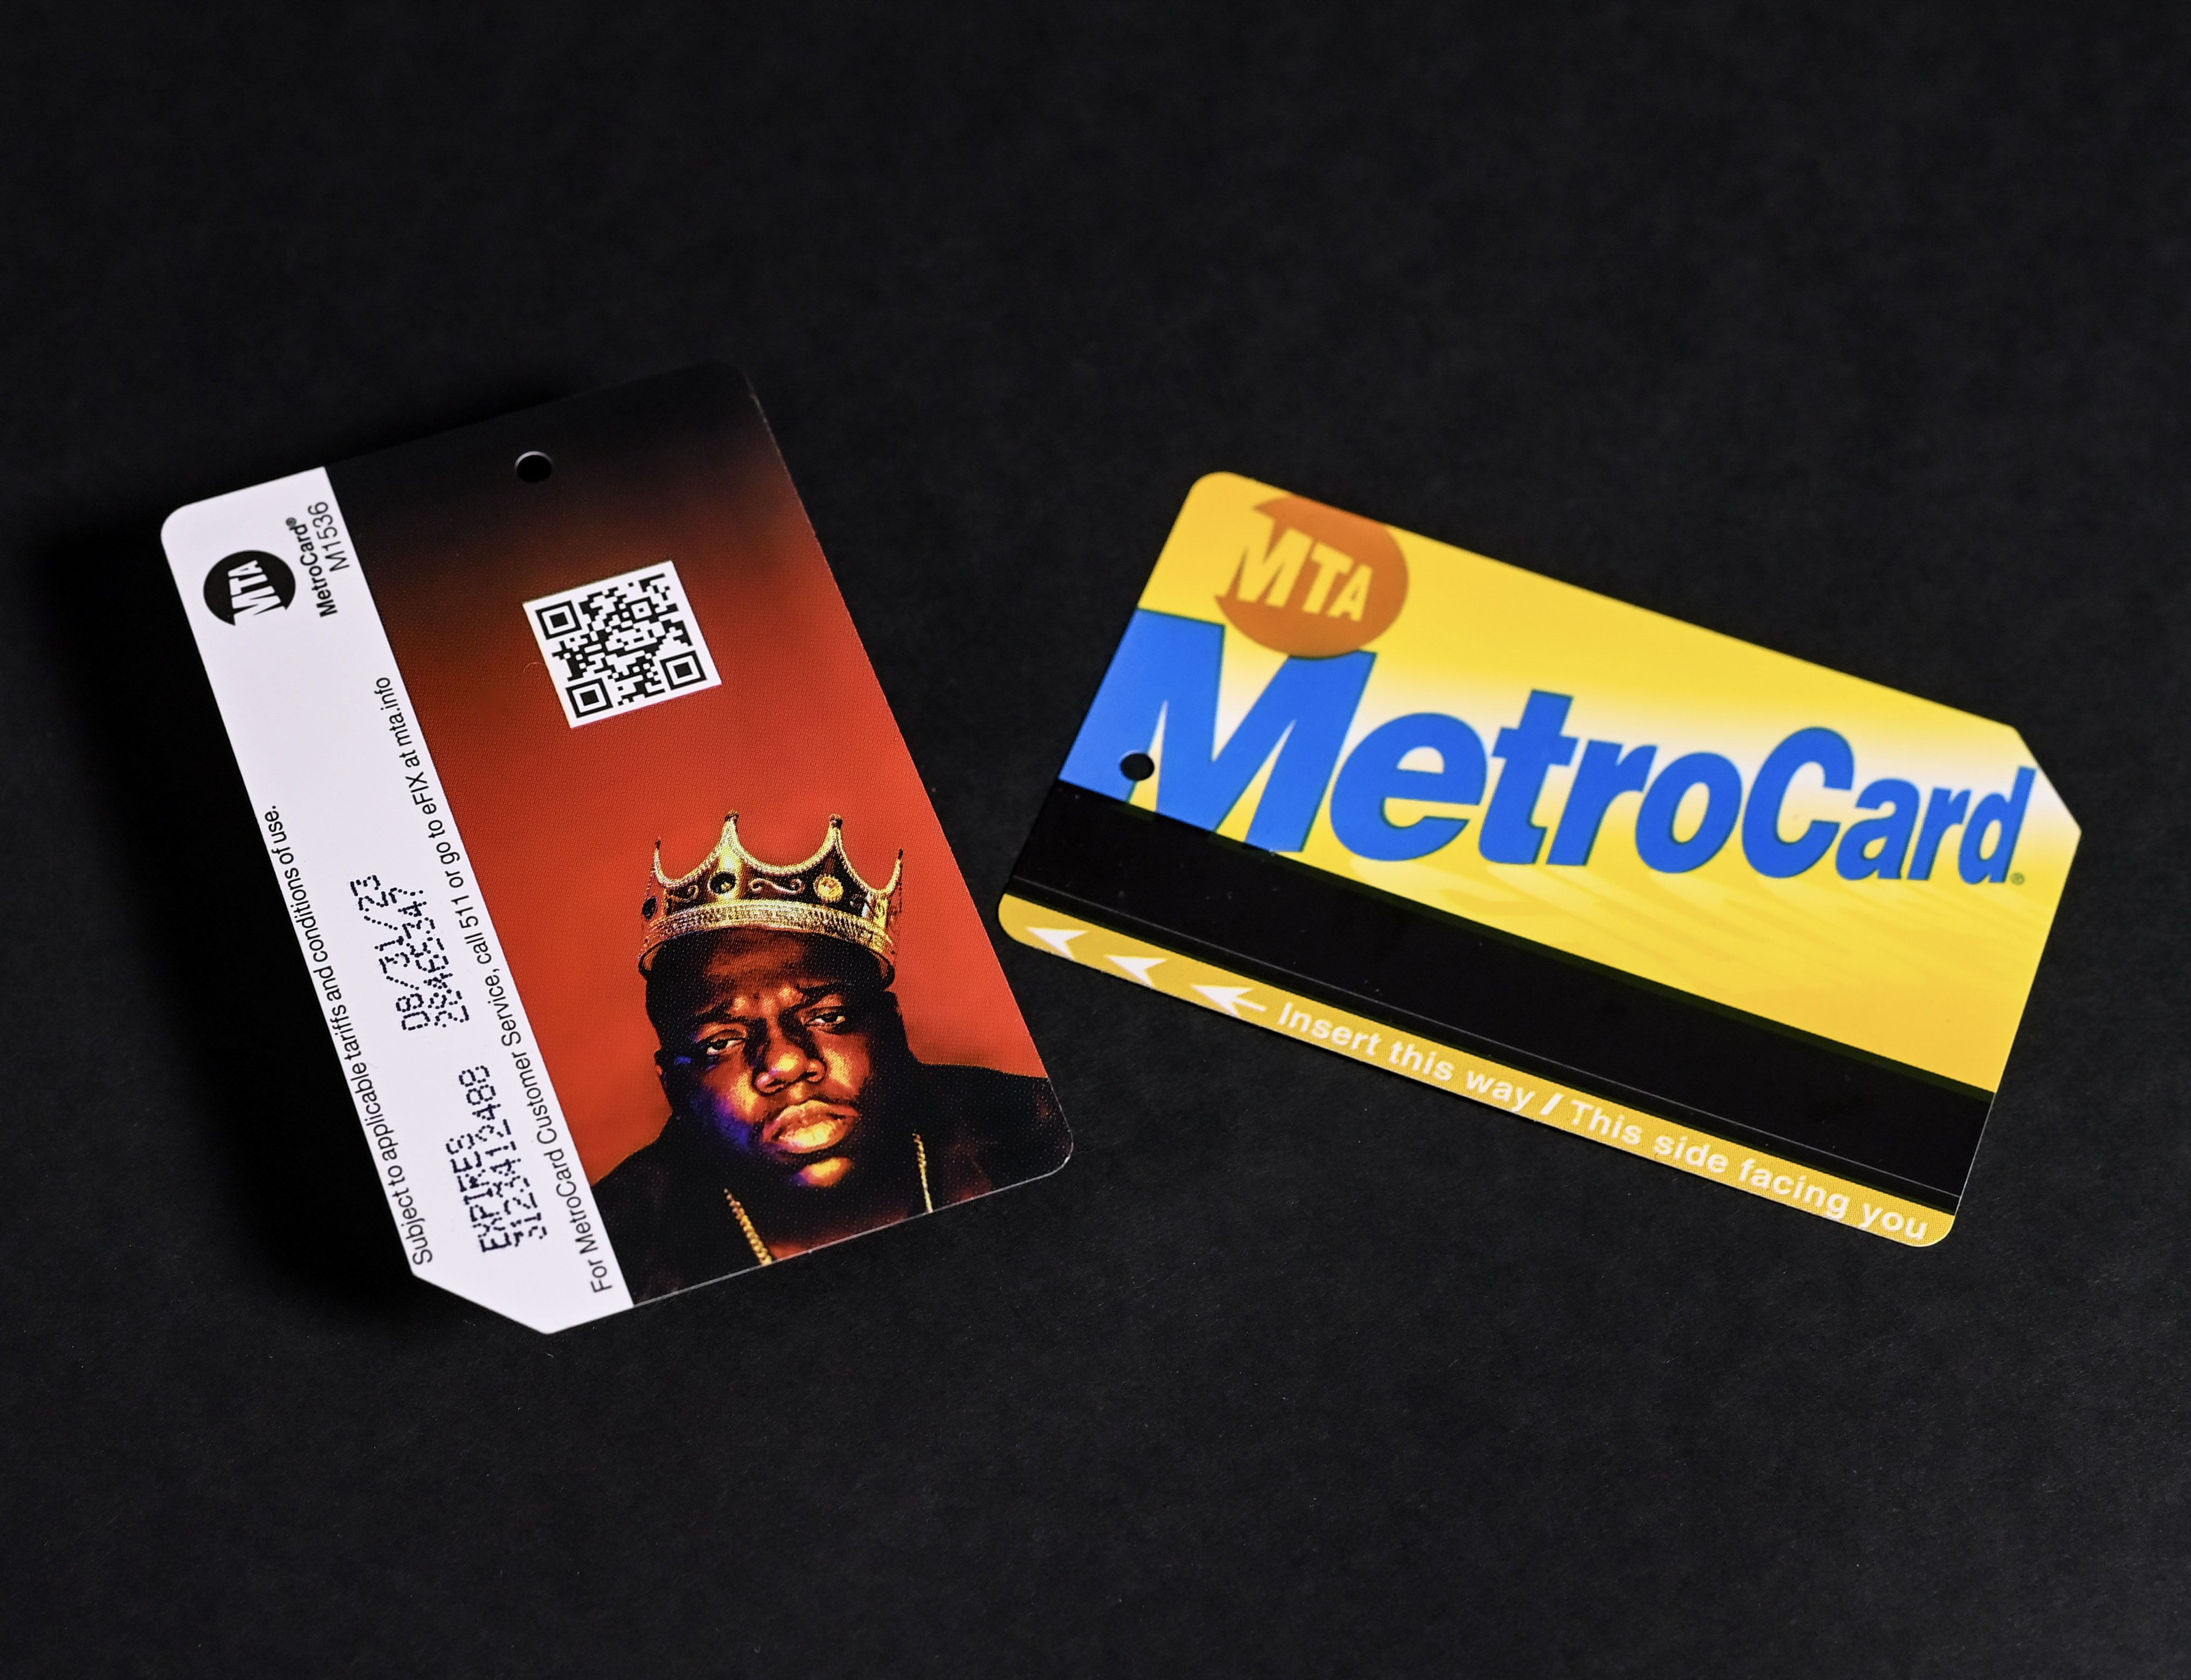 PHOTOS: MTA to Celebrate Notorious B.I.G’s 50th Birthday with Commemorative MetroCards on May 21 